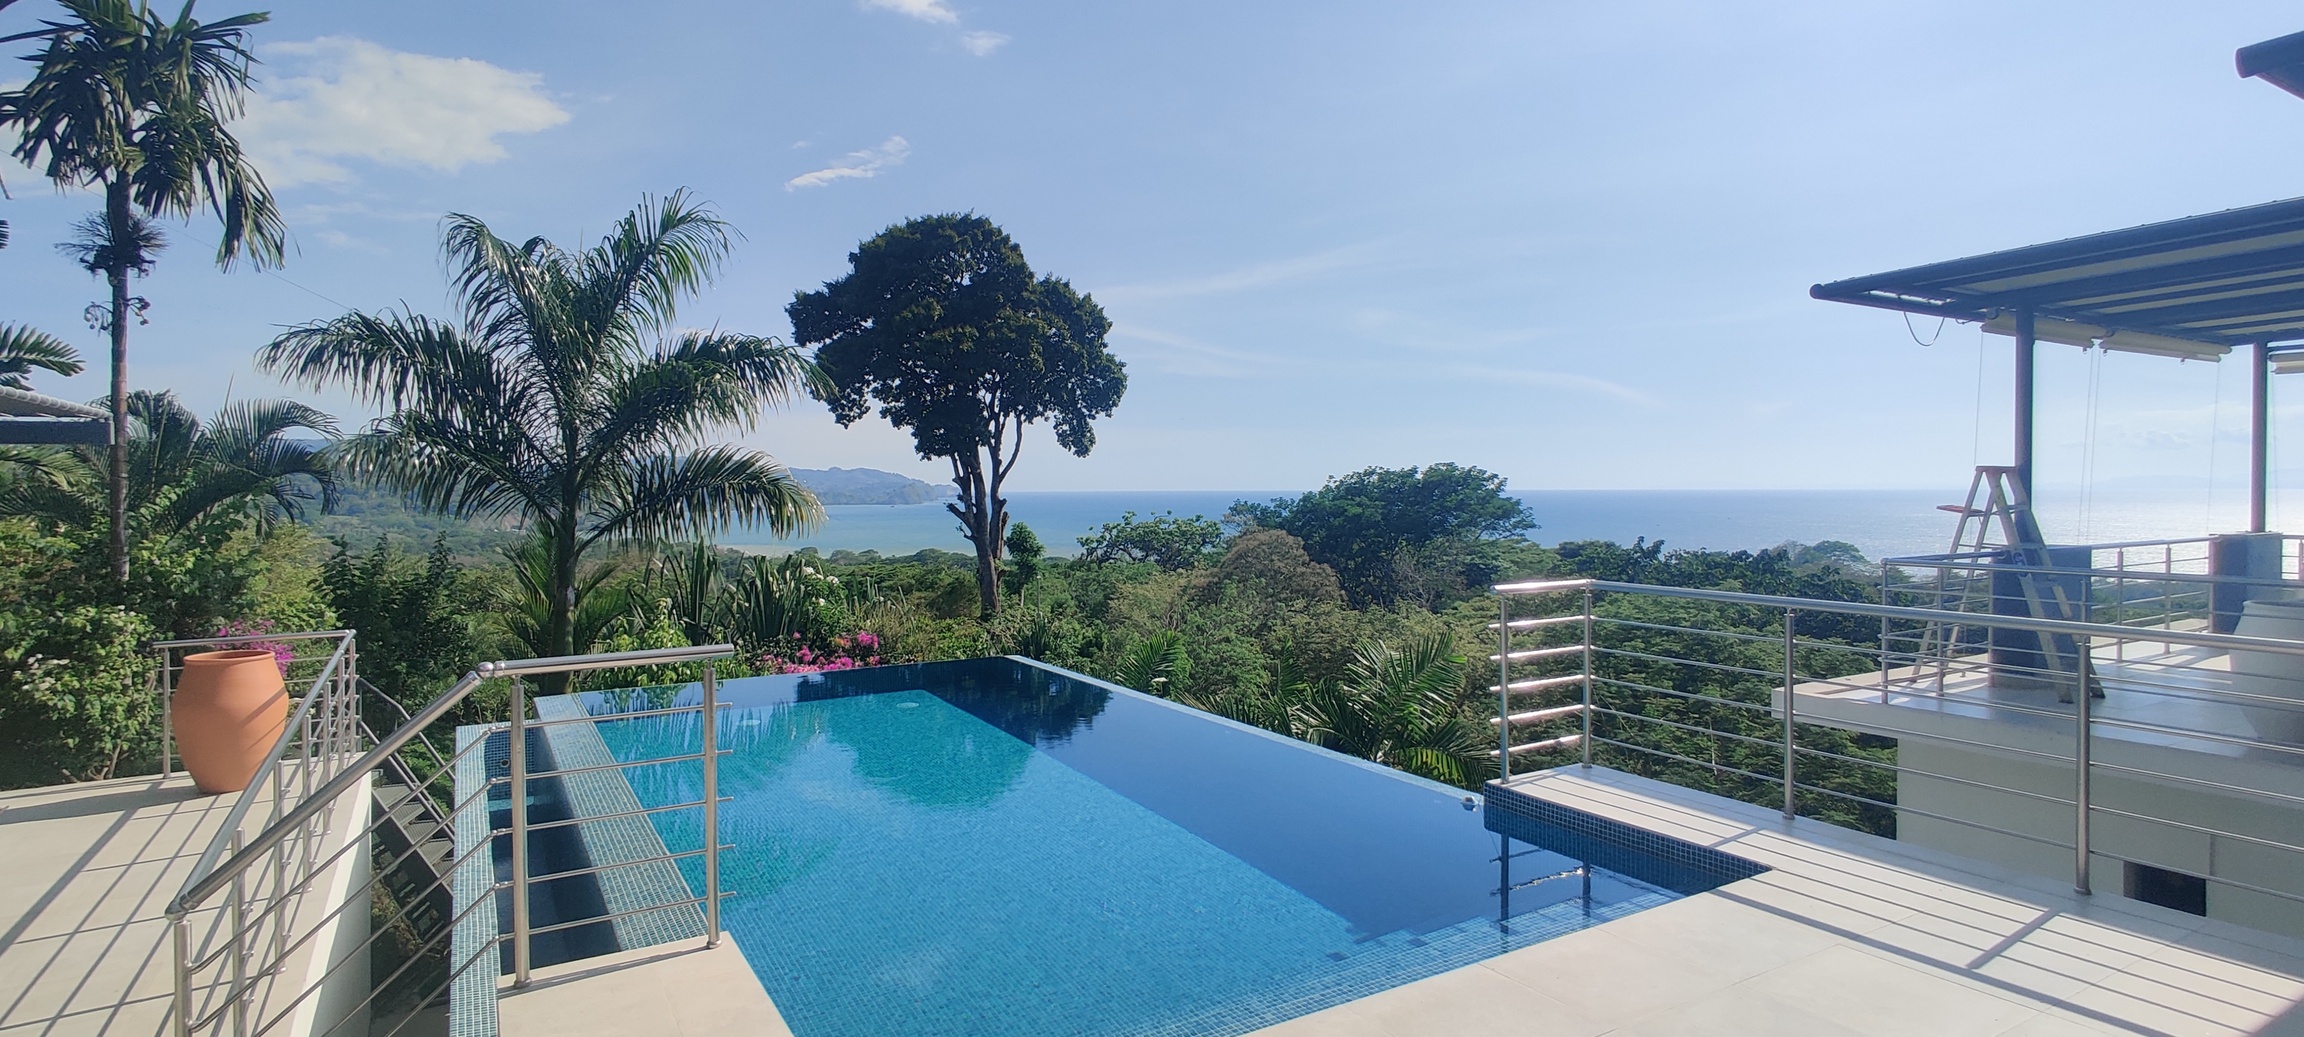 Oceanfront Oasis: Top-Quality 5-Bedroom House with Private Pool in Costa Rica